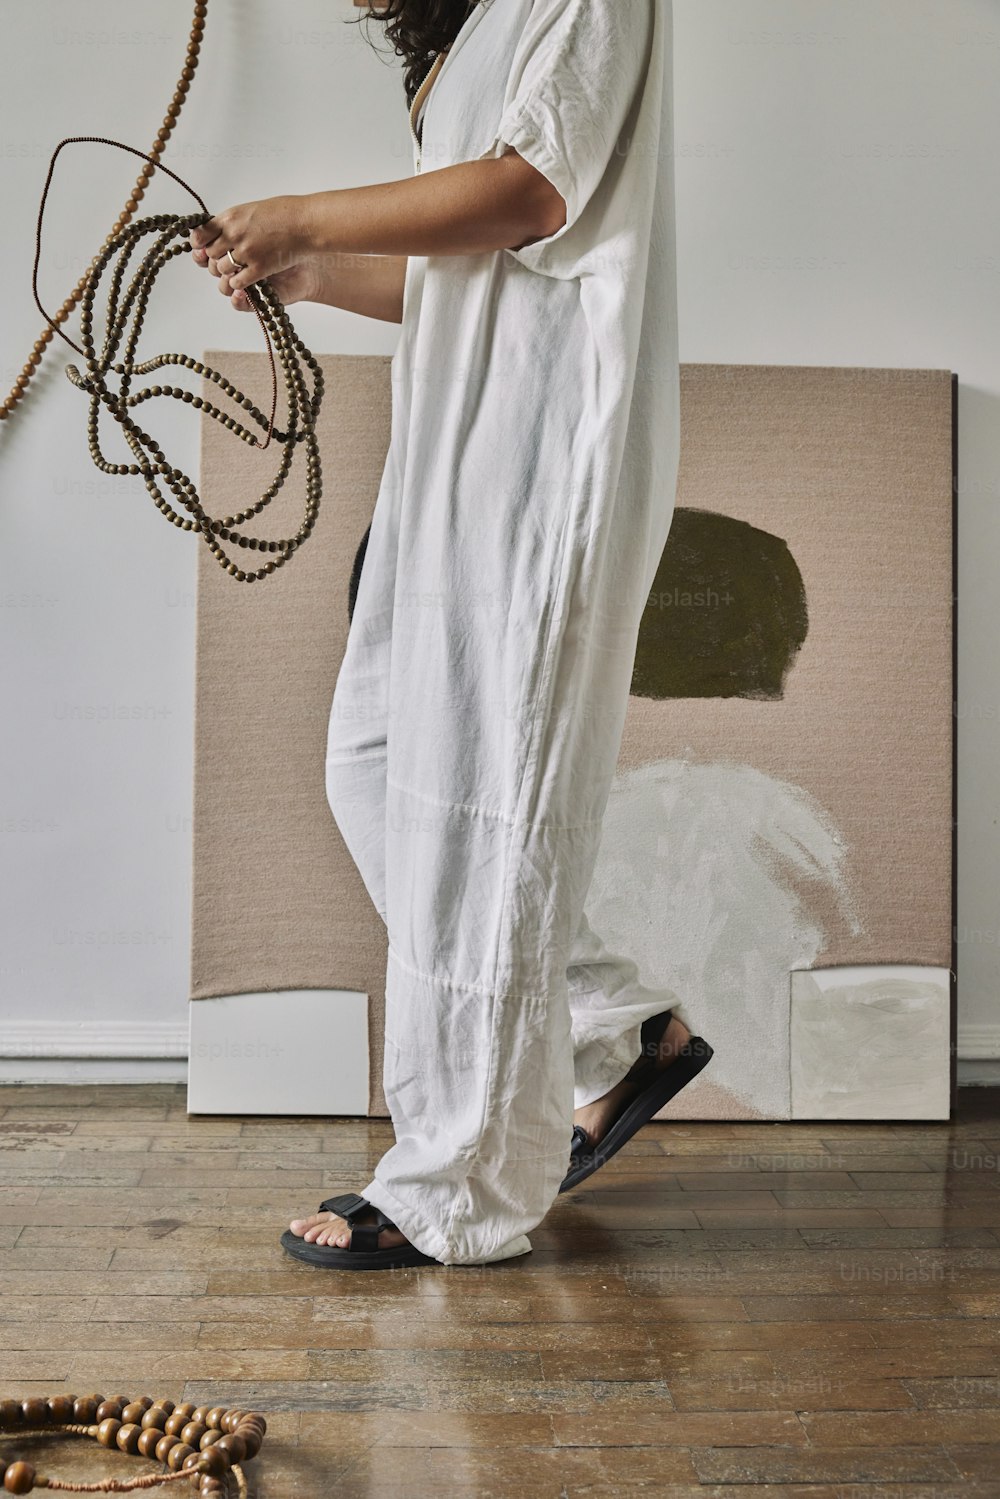 a woman standing on a wooden floor holding a rope